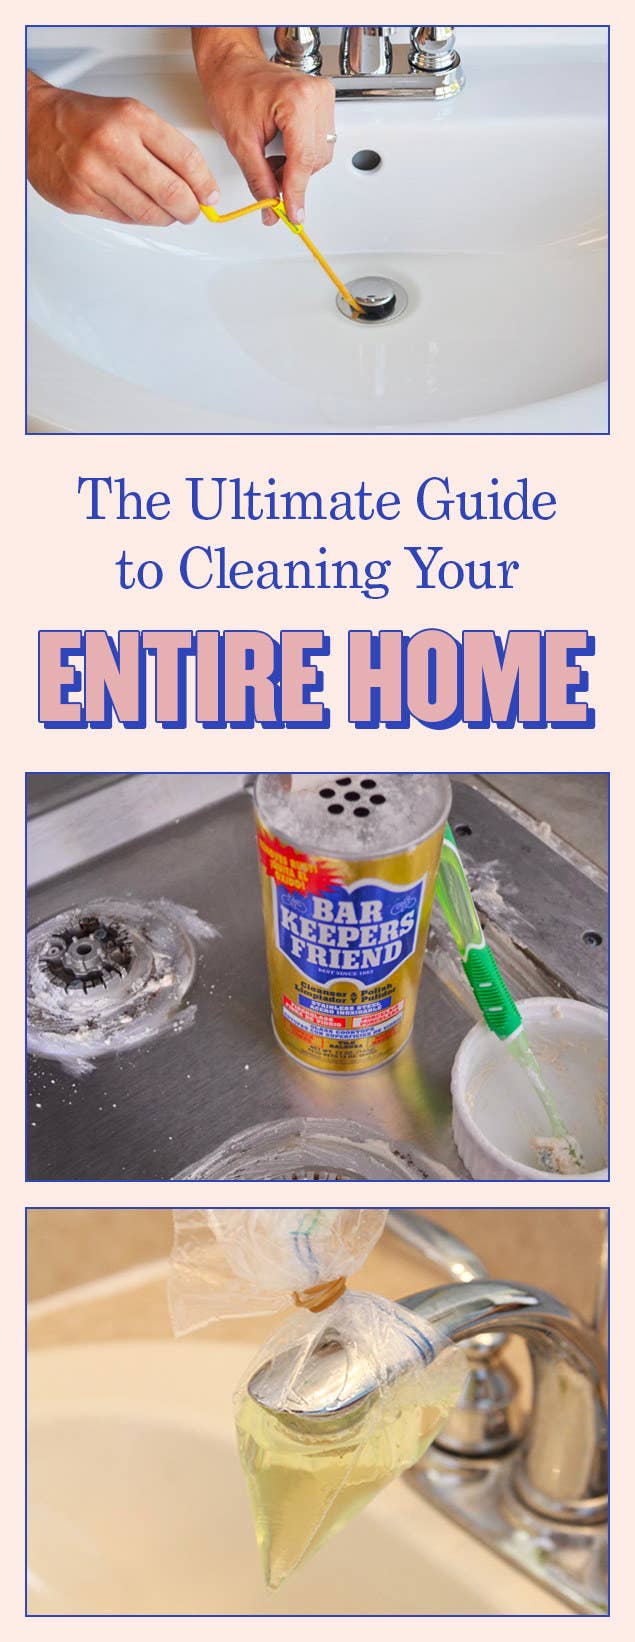 The Complete Guide on How to Unclog a Drain at Home